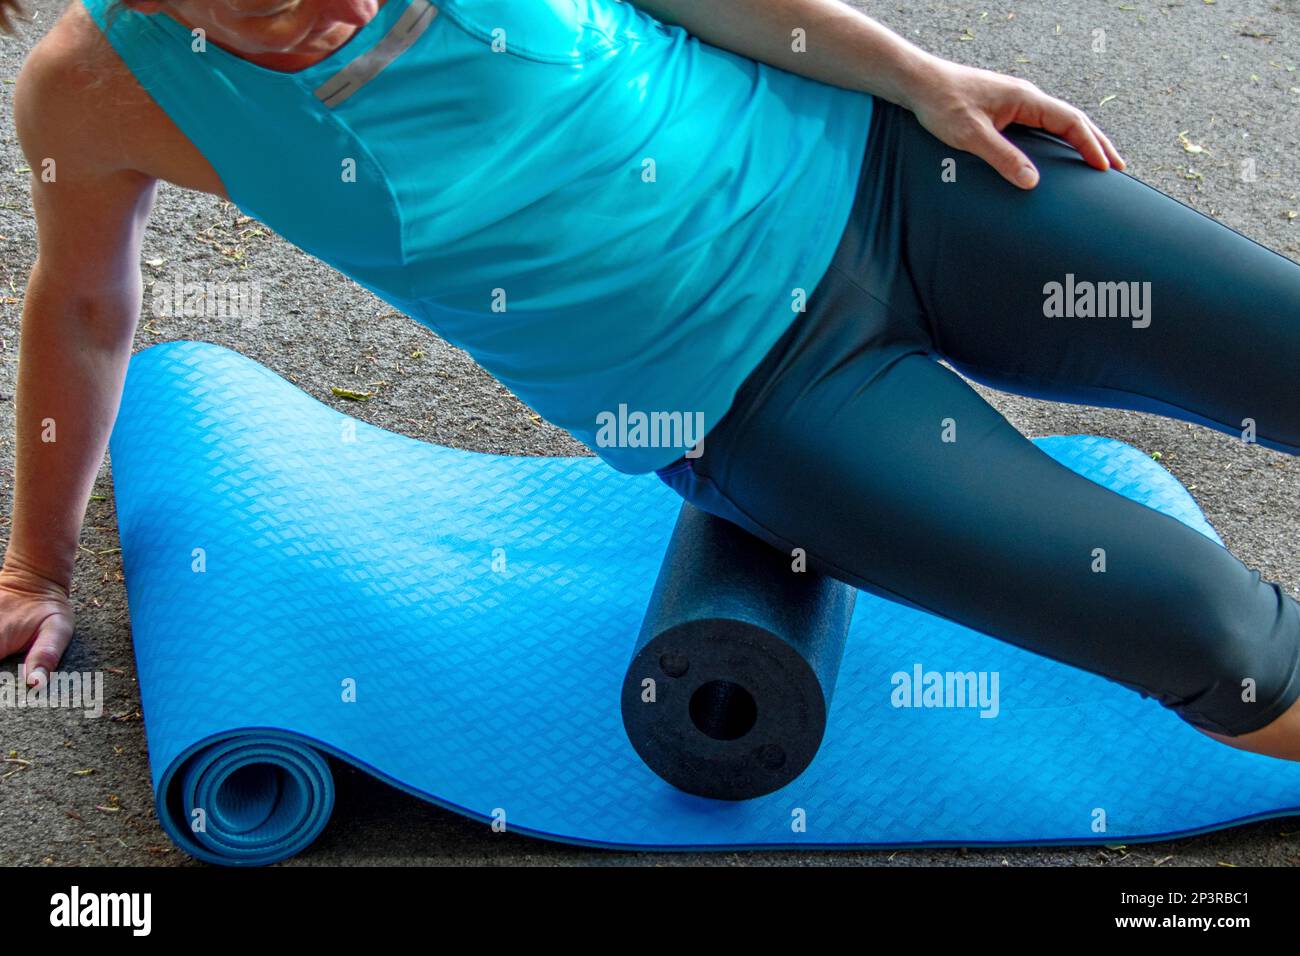 Accessories for the sport training and gymnastic to remain fit Stock Photo